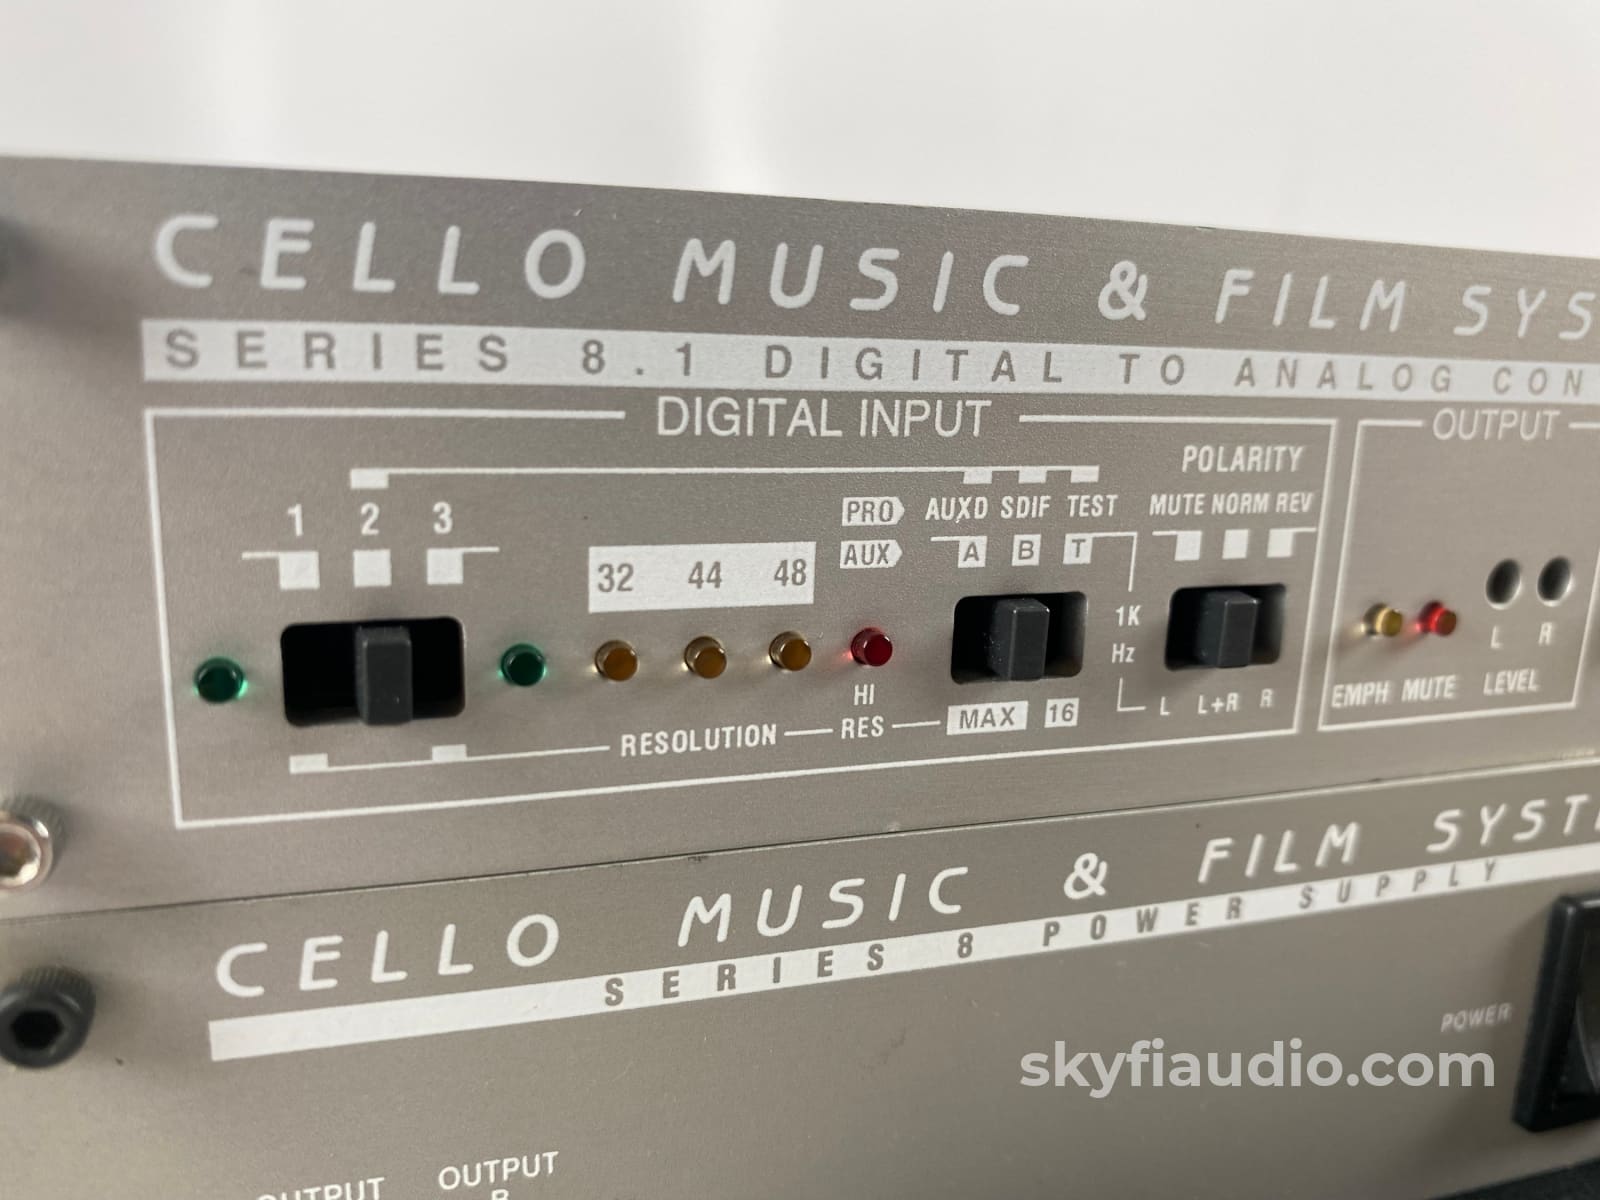 Cello Music & Film Systems Series 8.1 Dac With Power Supply Cd + Digital